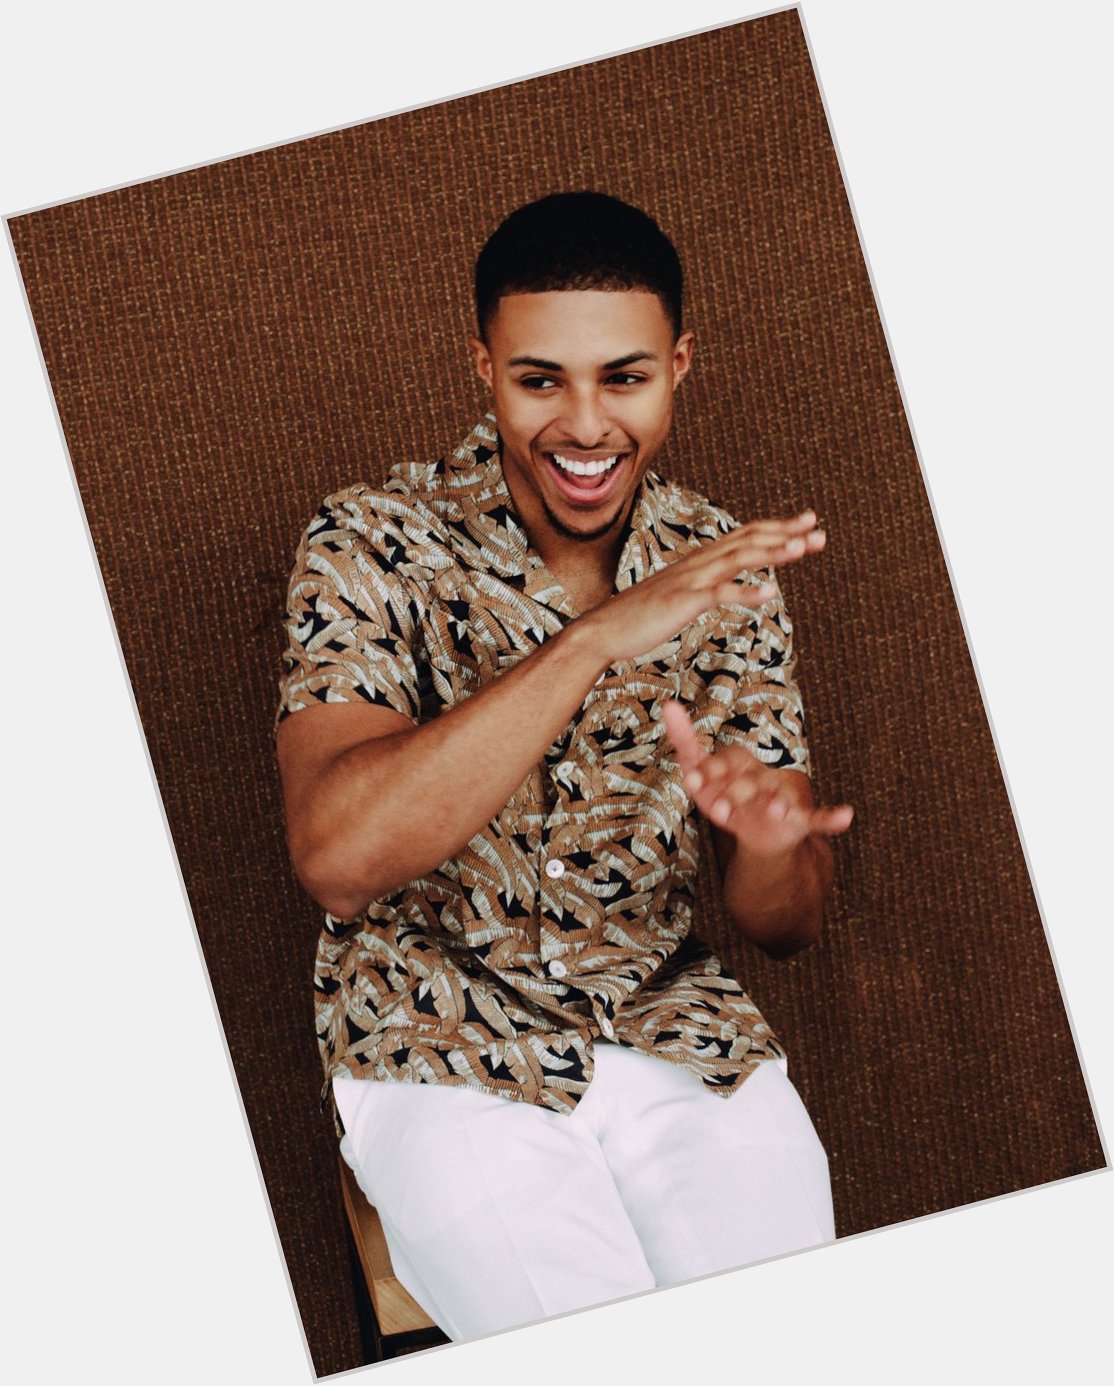 Happy 22nd Birthday to We\ve watched him grow up from Runs House to the Runway!  